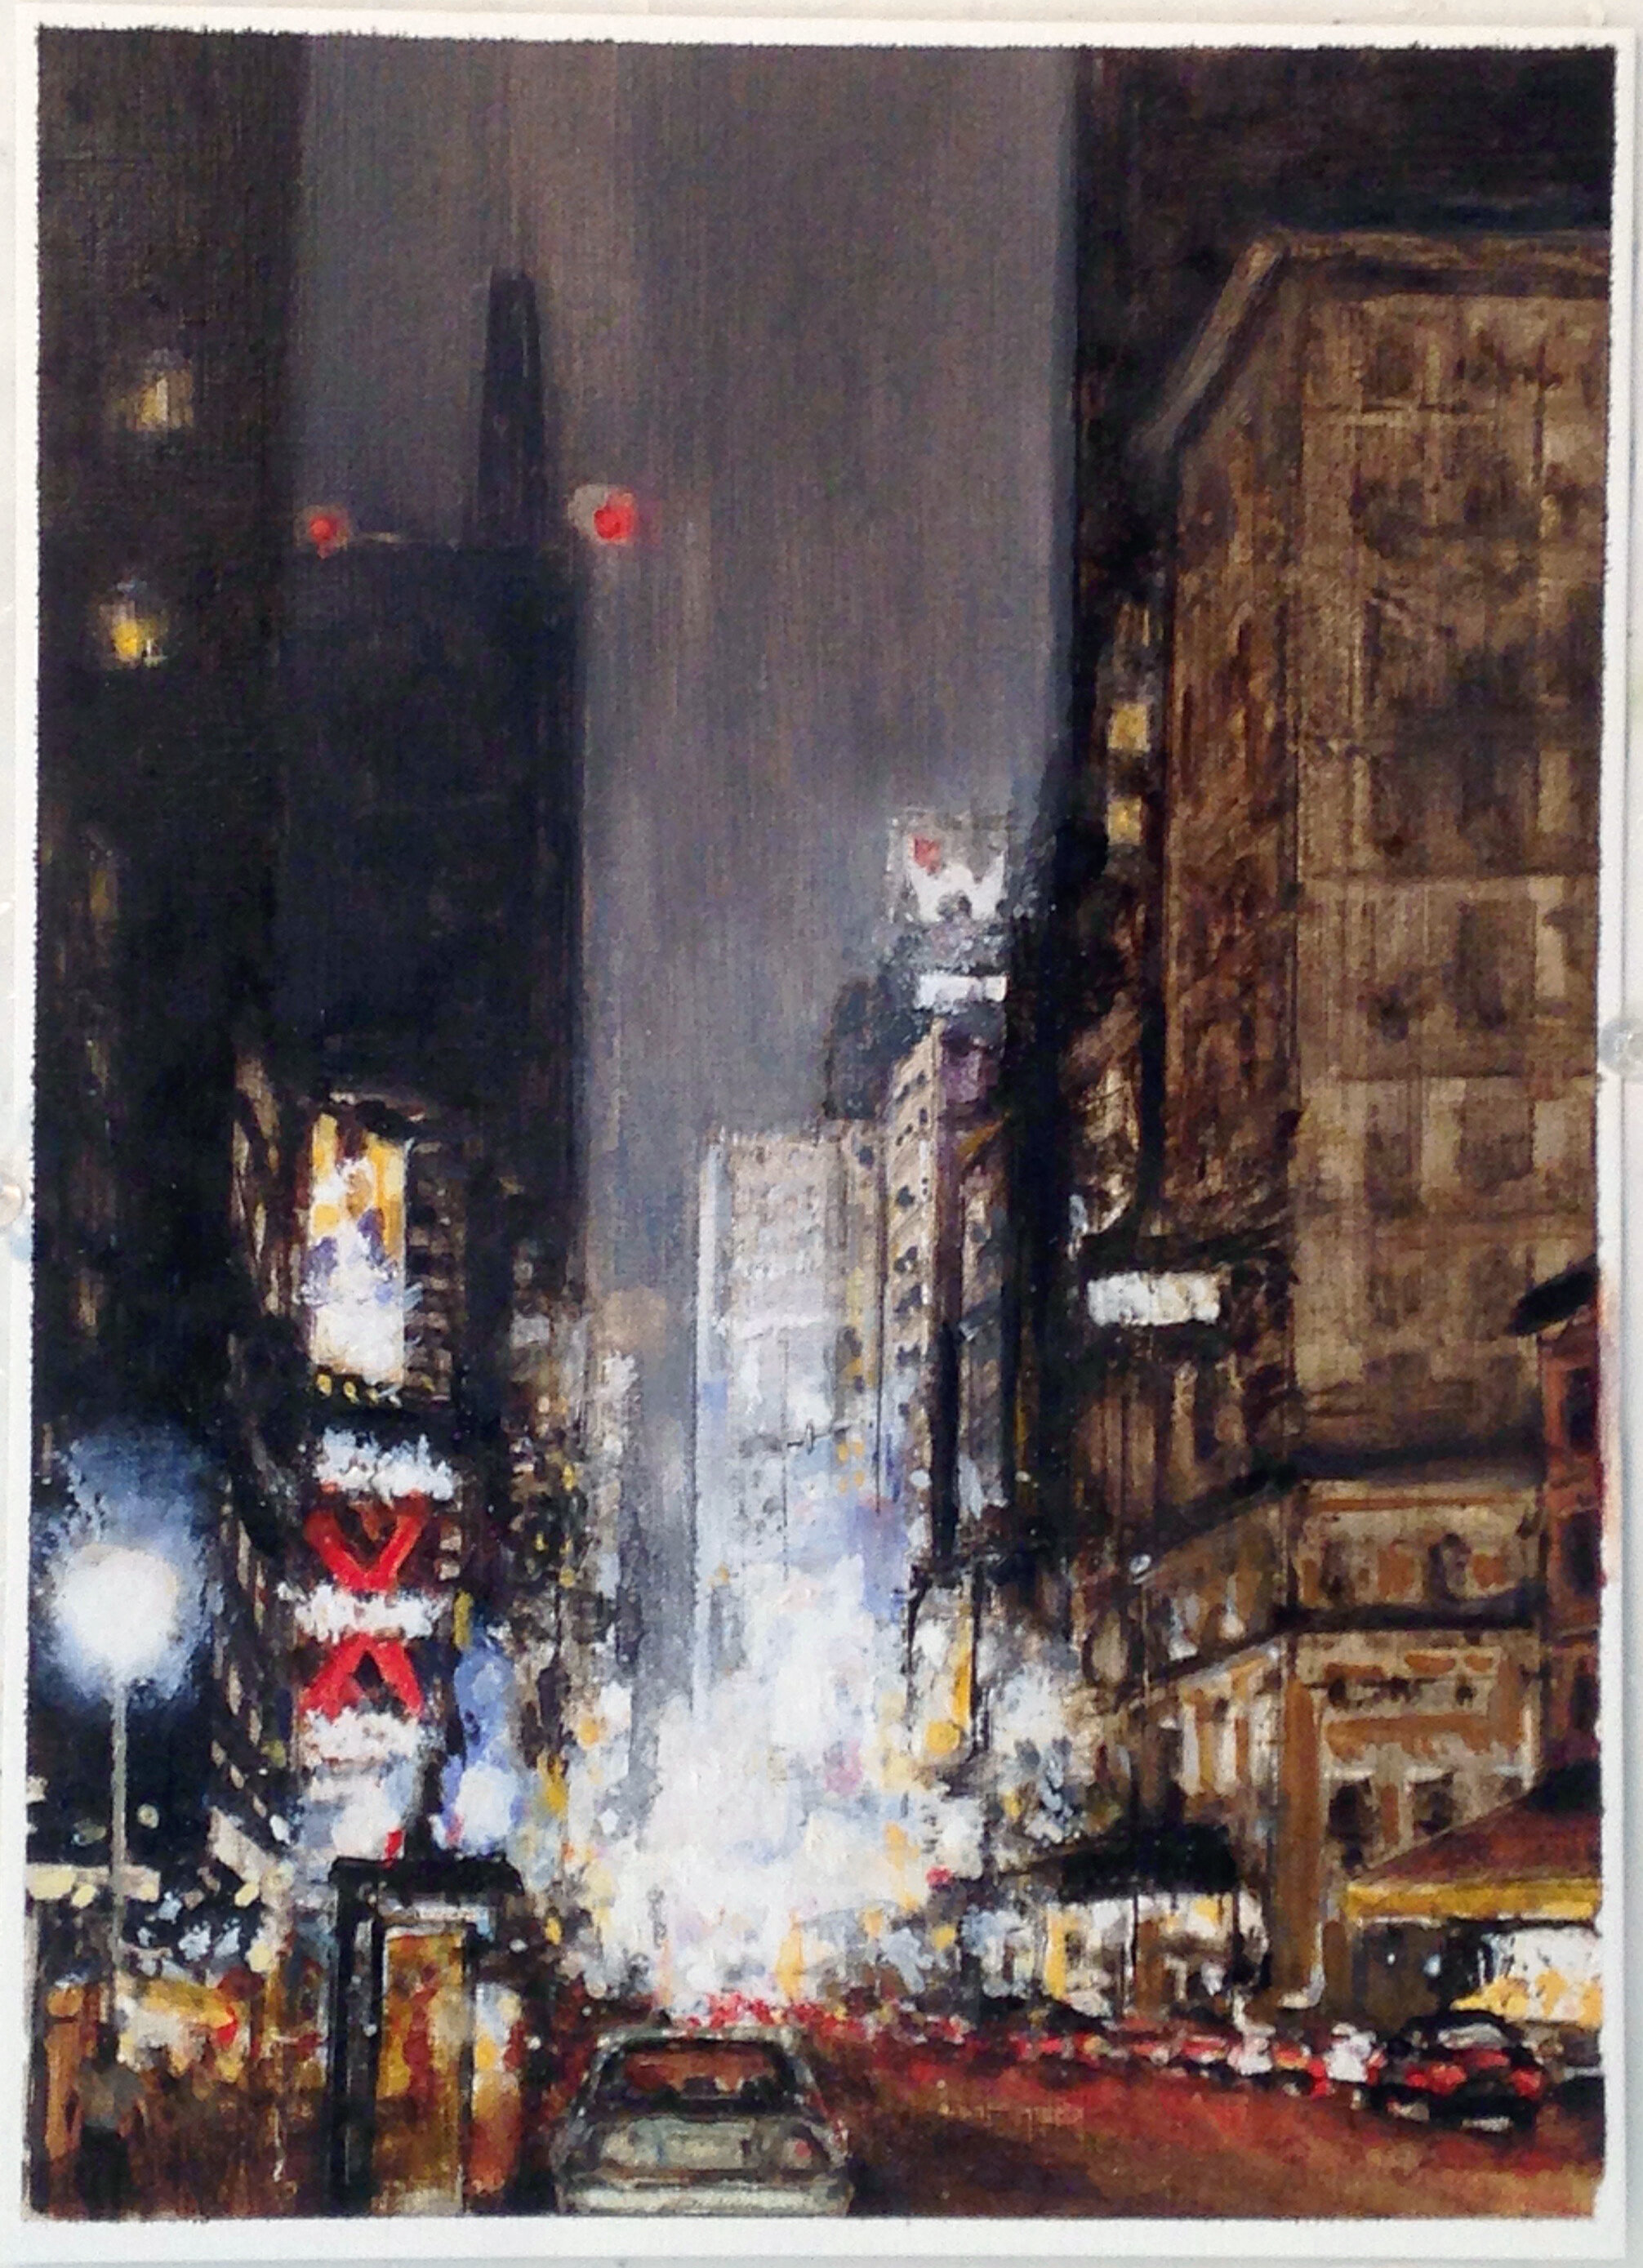  Times Square At Night (study) 13 x 9.5 inches Oil on paper 2016 